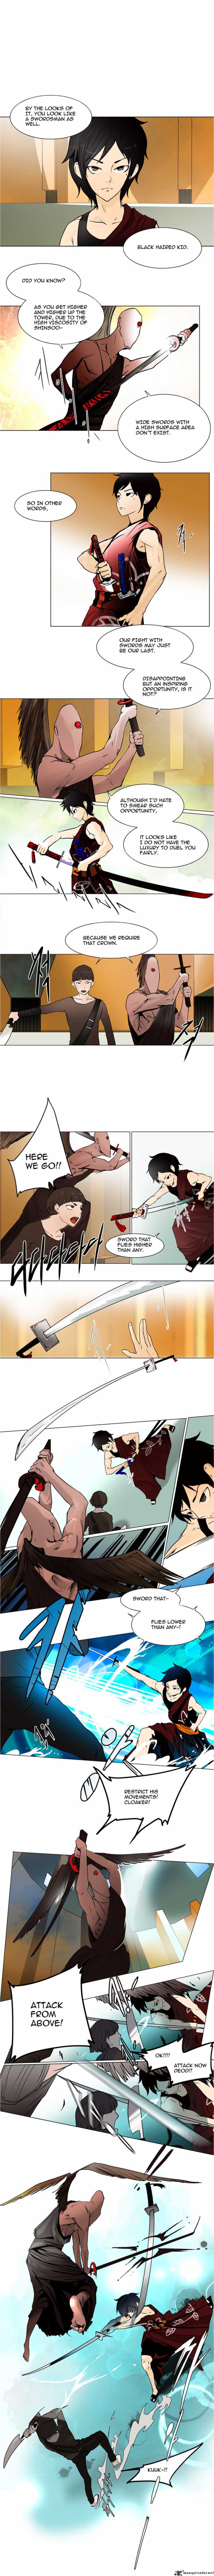 Tower Of God 16 4